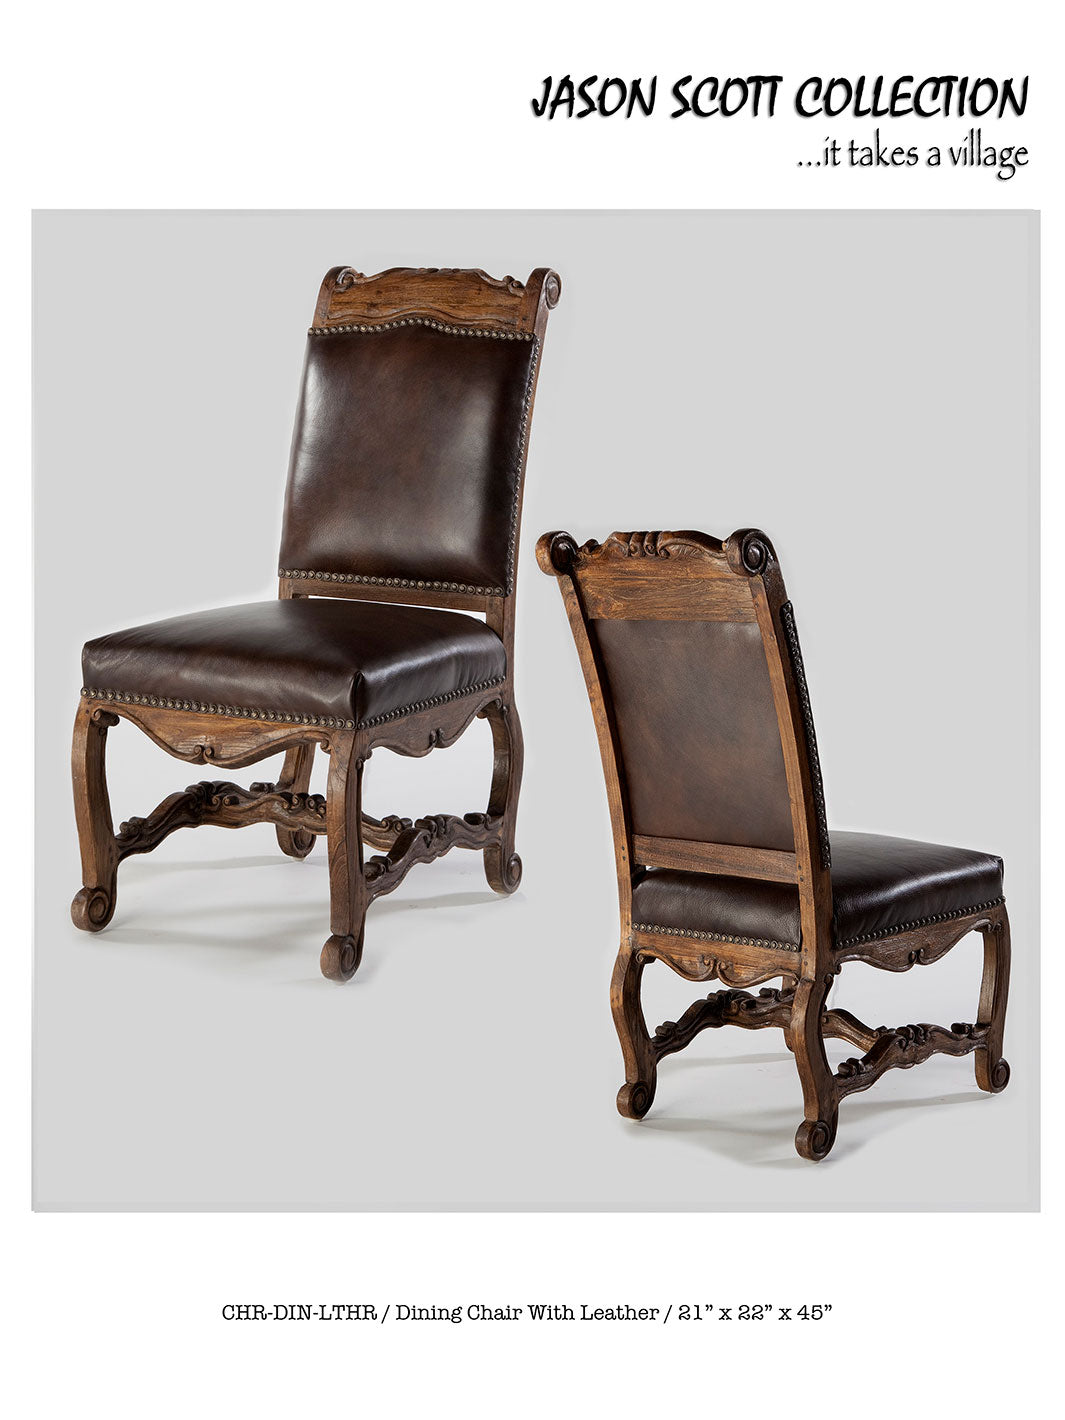 Jason Scott Dining Chair with Leather